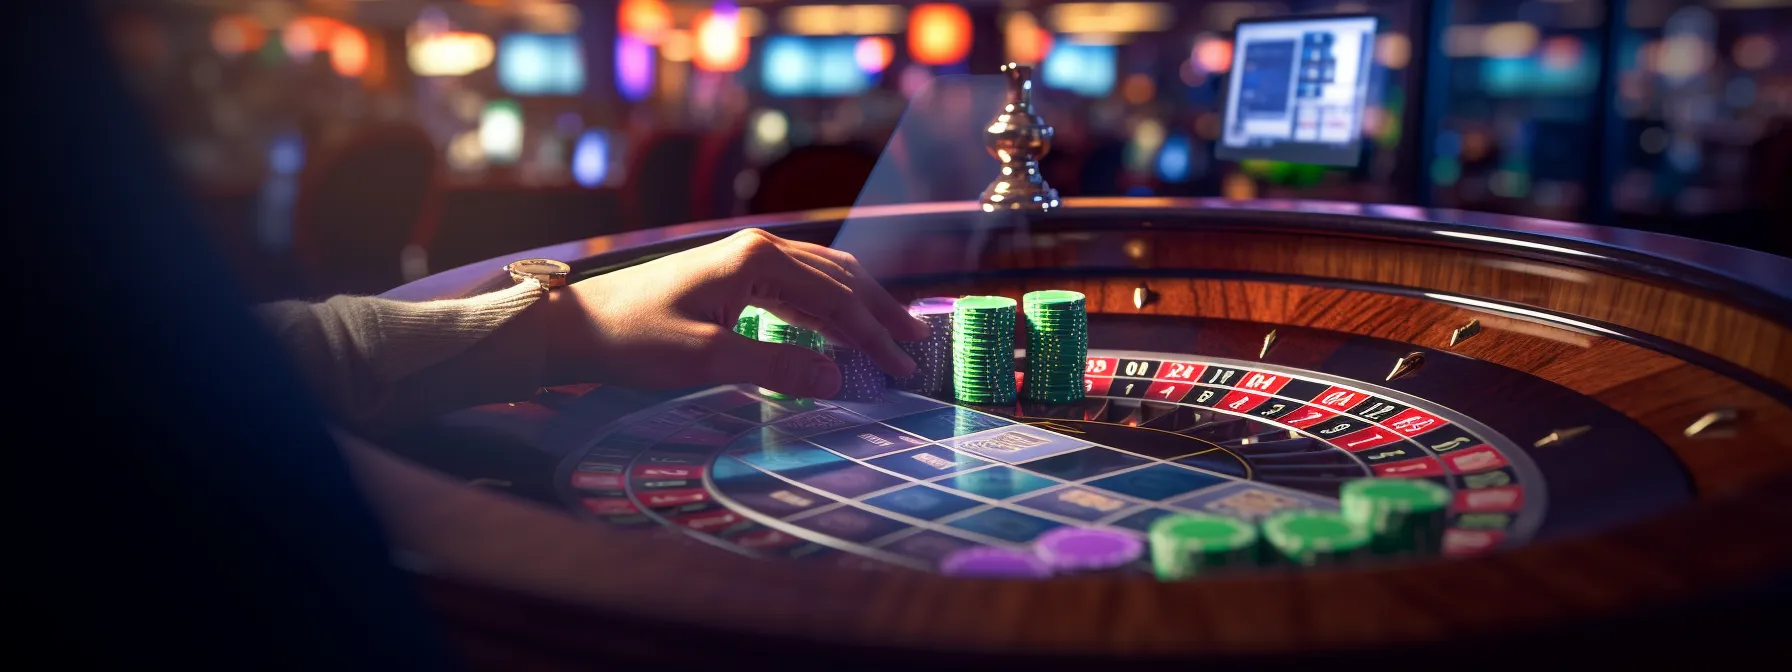 keywords being researched and integrated into website content to improve seo performance and attract more visitors to a casino website.